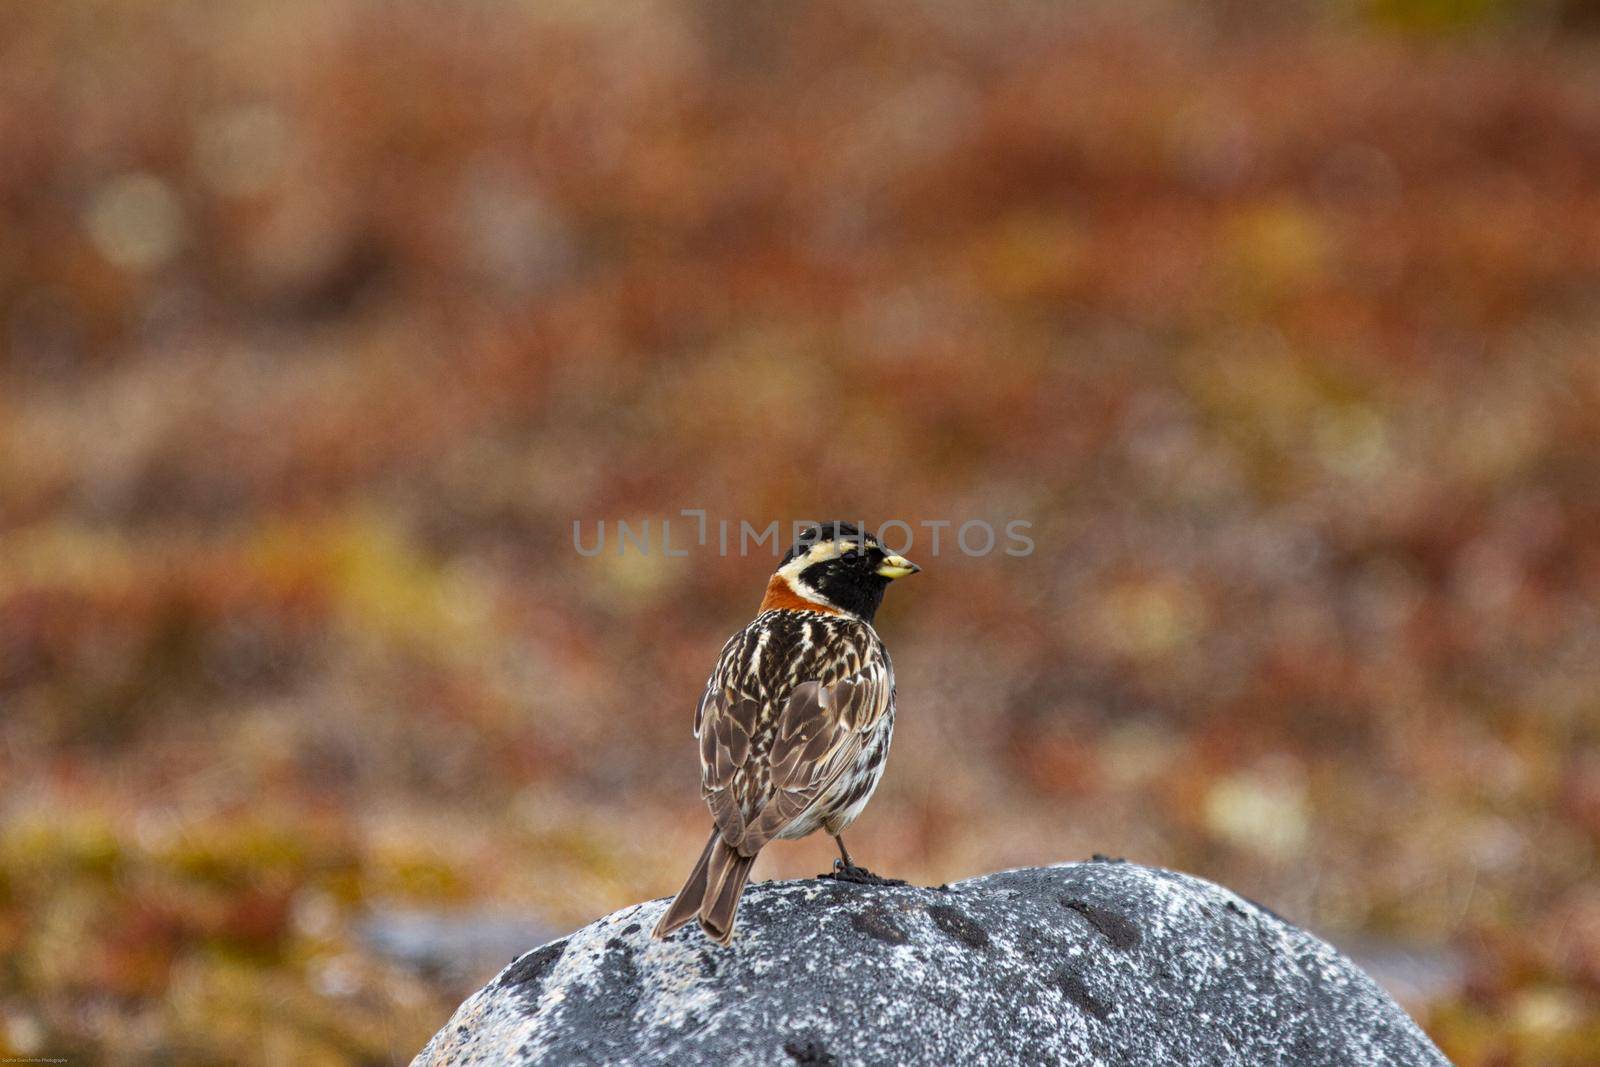 Lapland longspur bird standing on a rock with red tundra in the background, near Arviat, Nunavut Canada. High quality photo